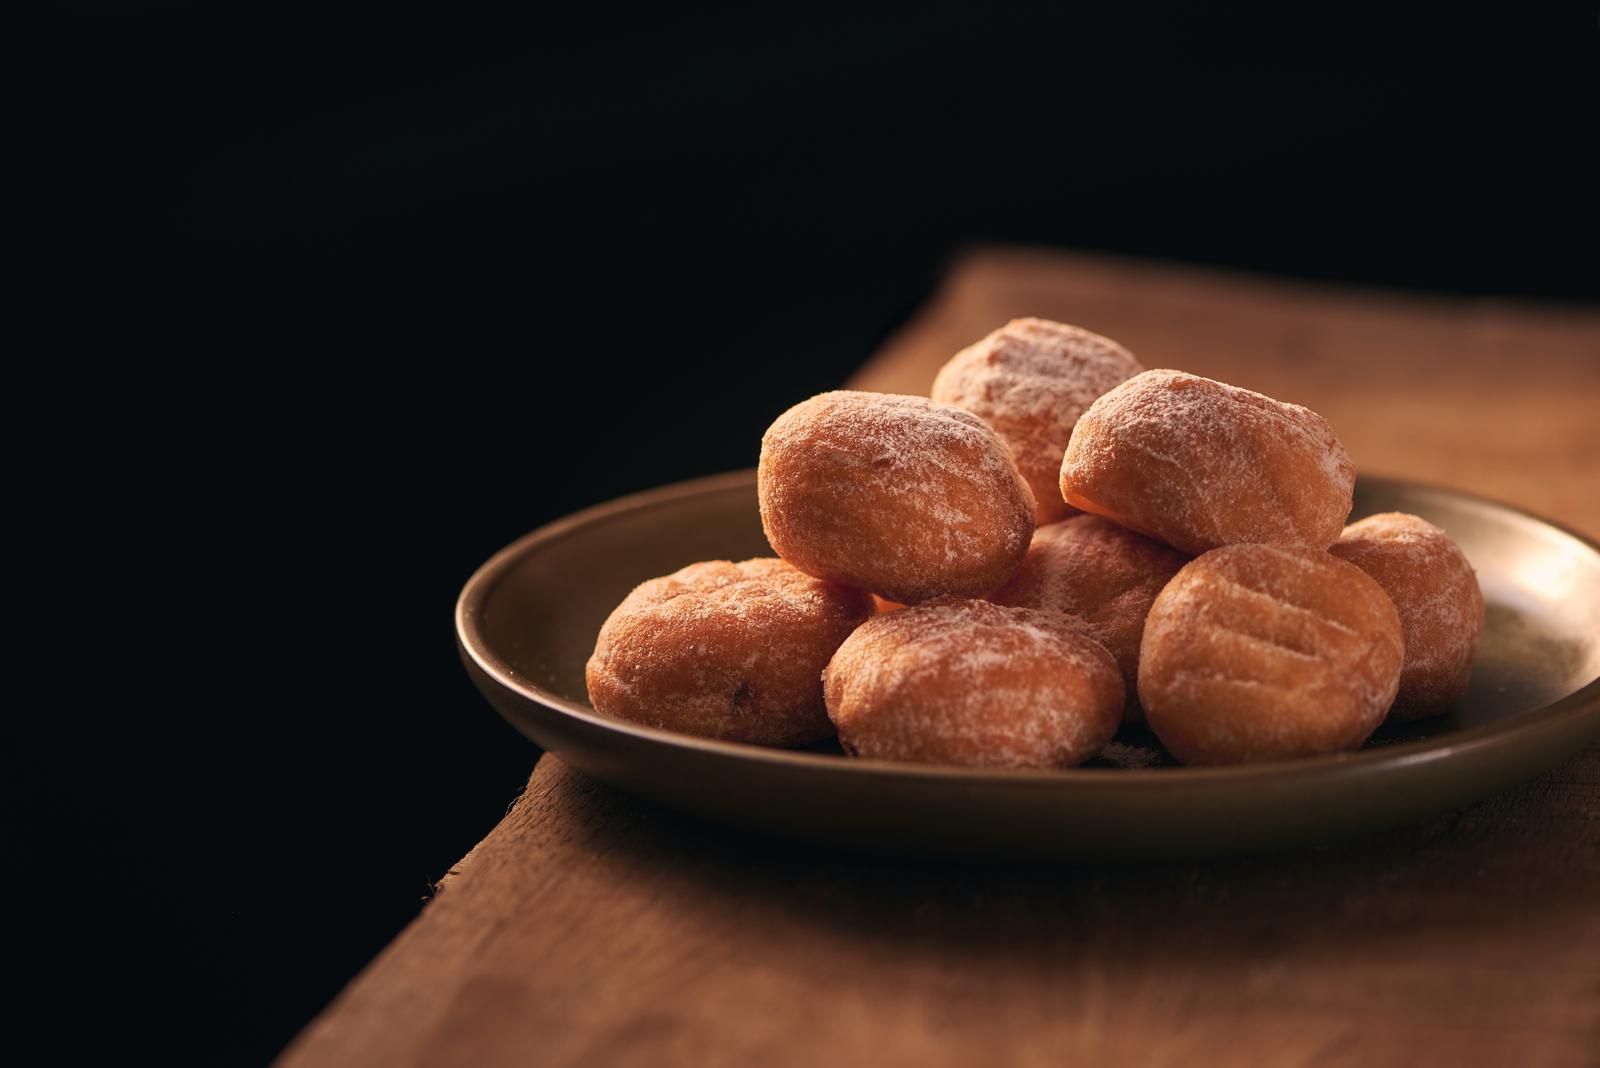 Small donuts with powdered sugar